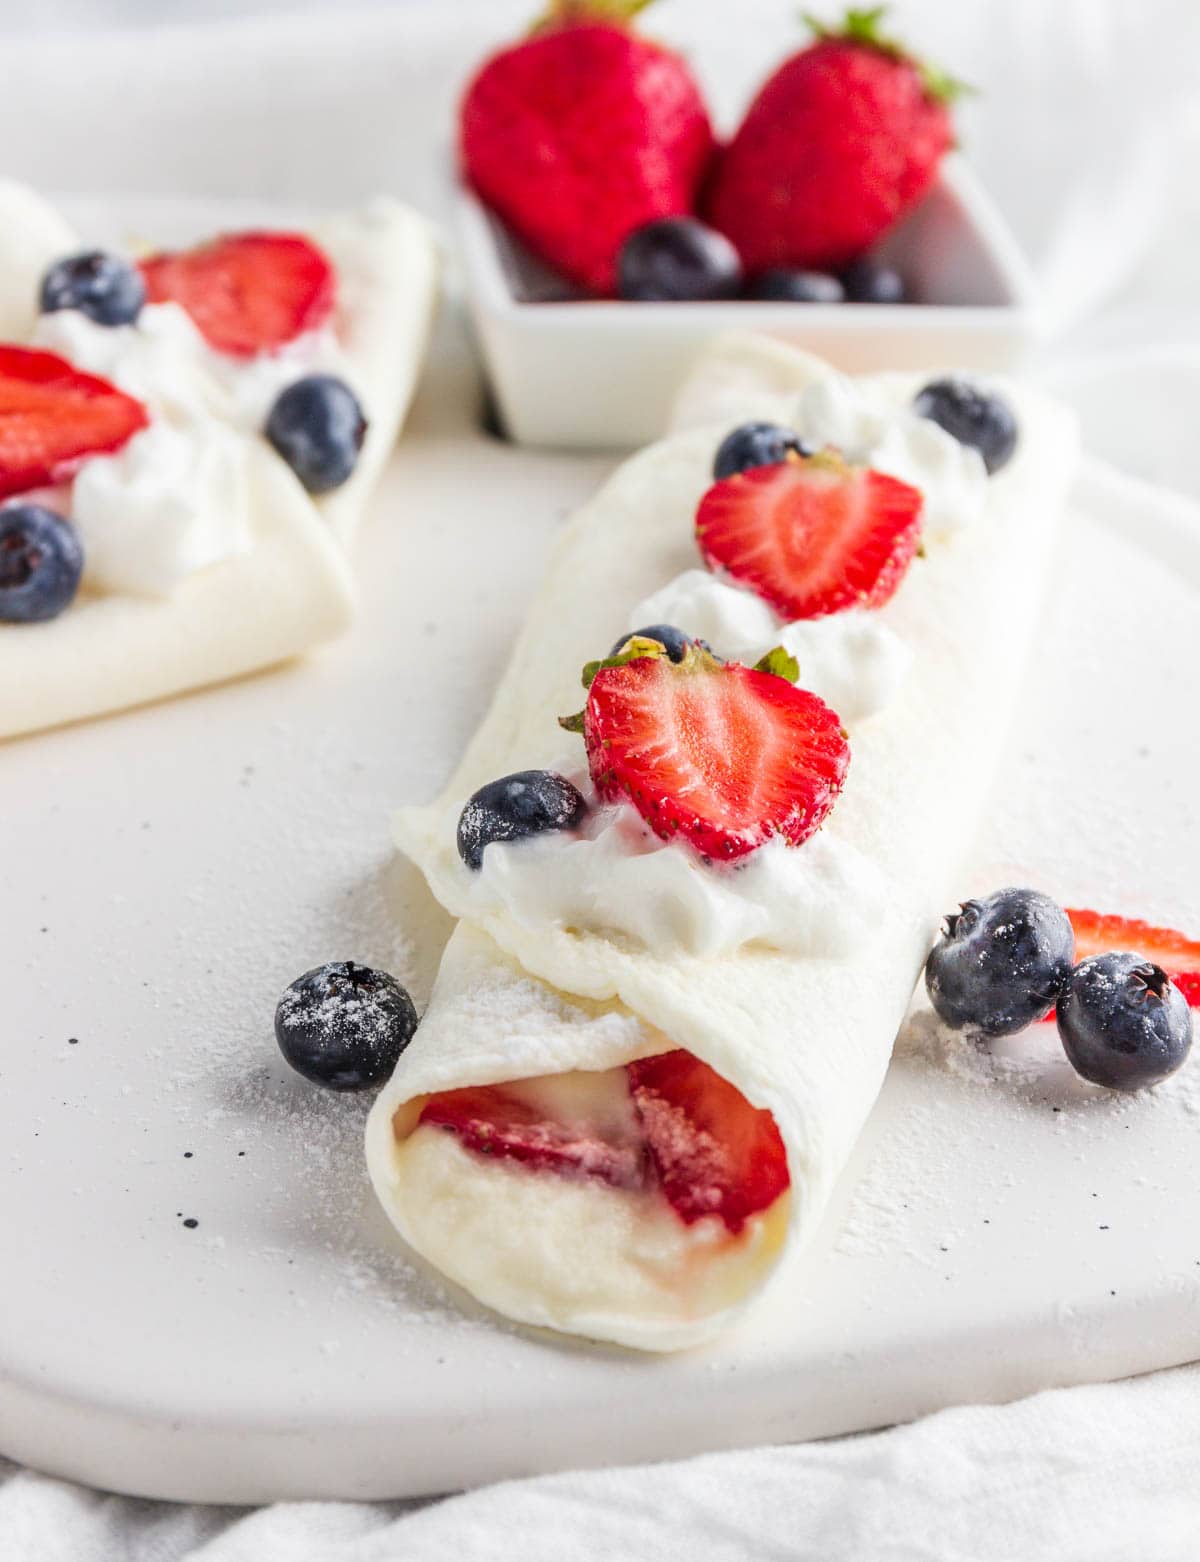 A stuffed crepe with cream and berries.